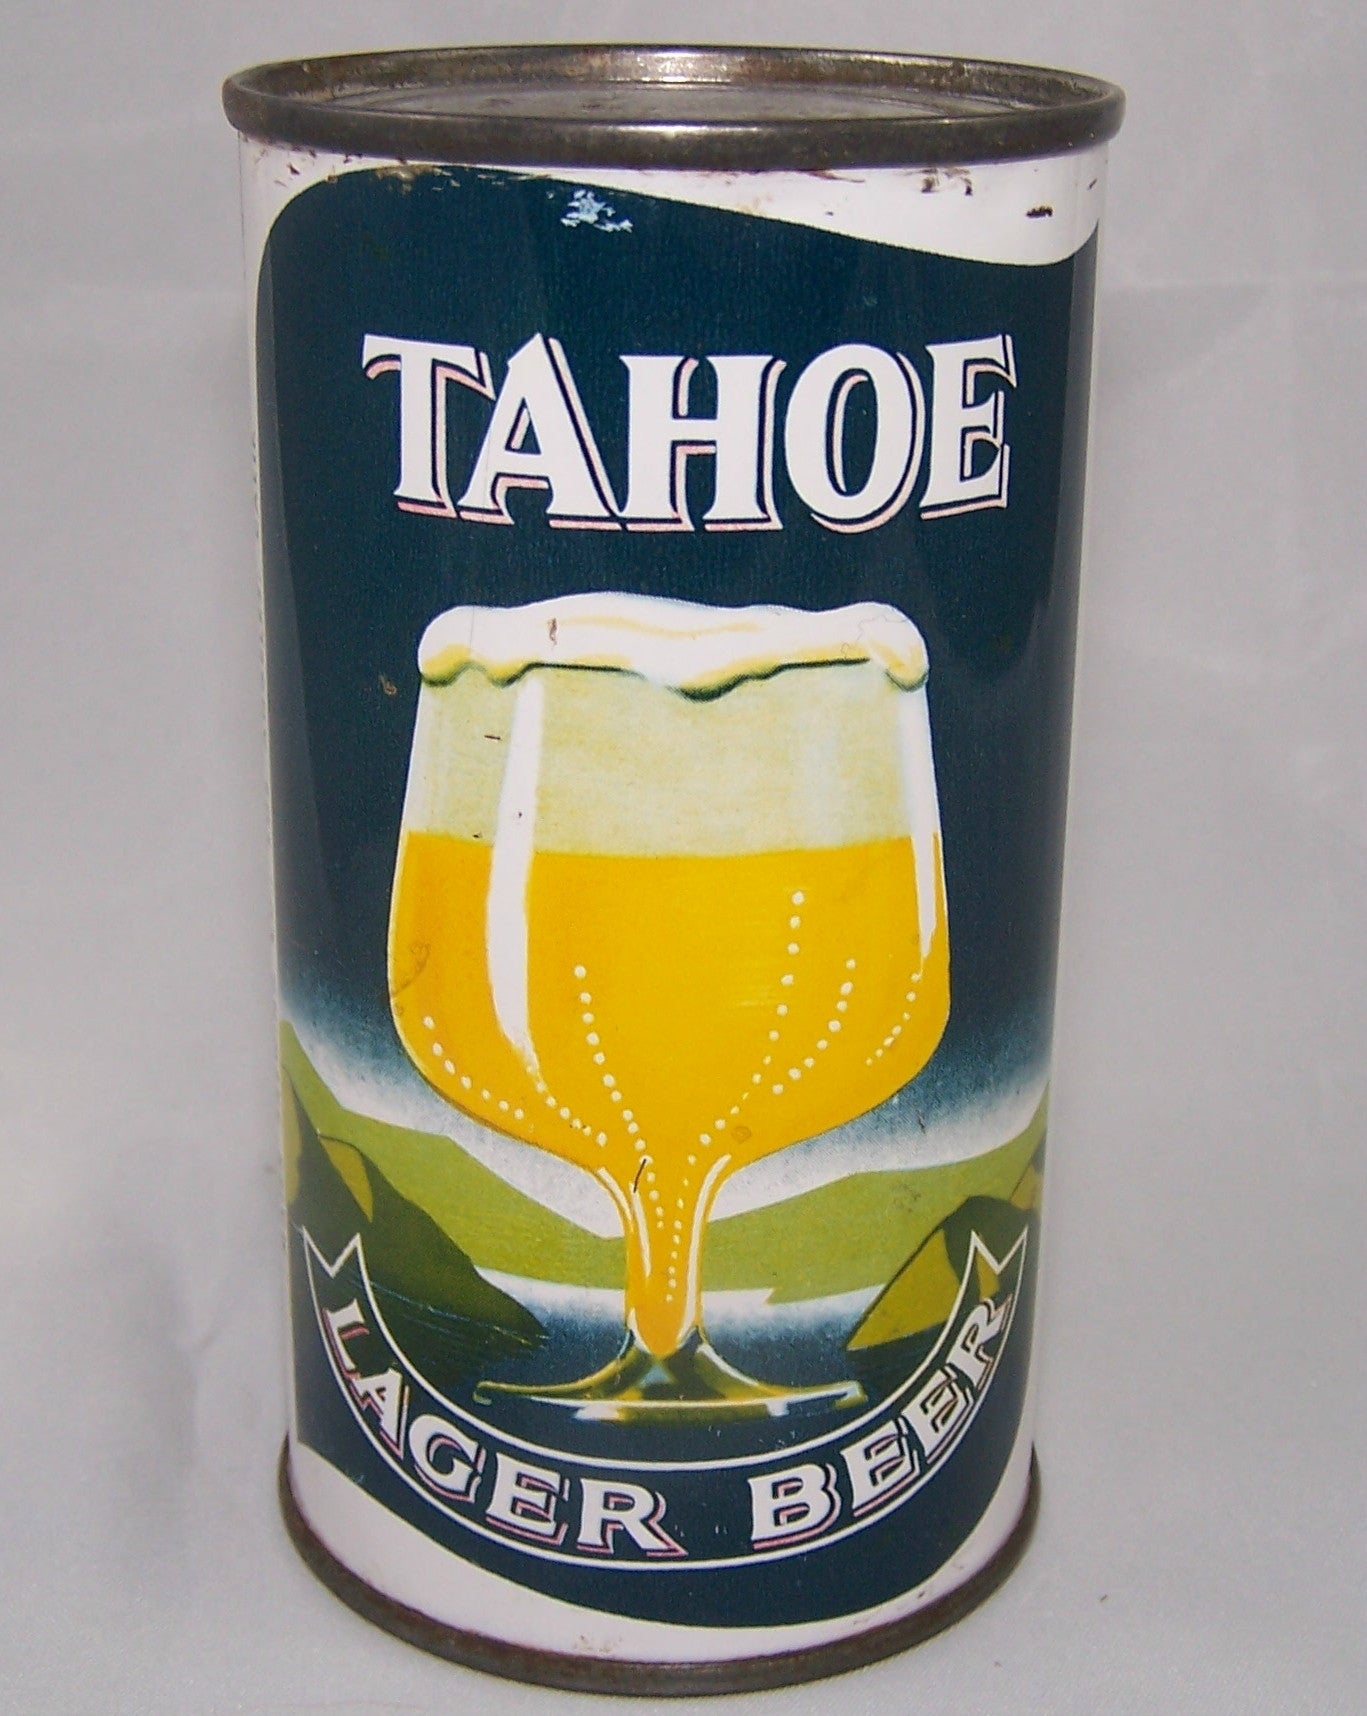 Tahoe Lager Beer, USBC 138-8, Grade 1- Sold on 05/15/16